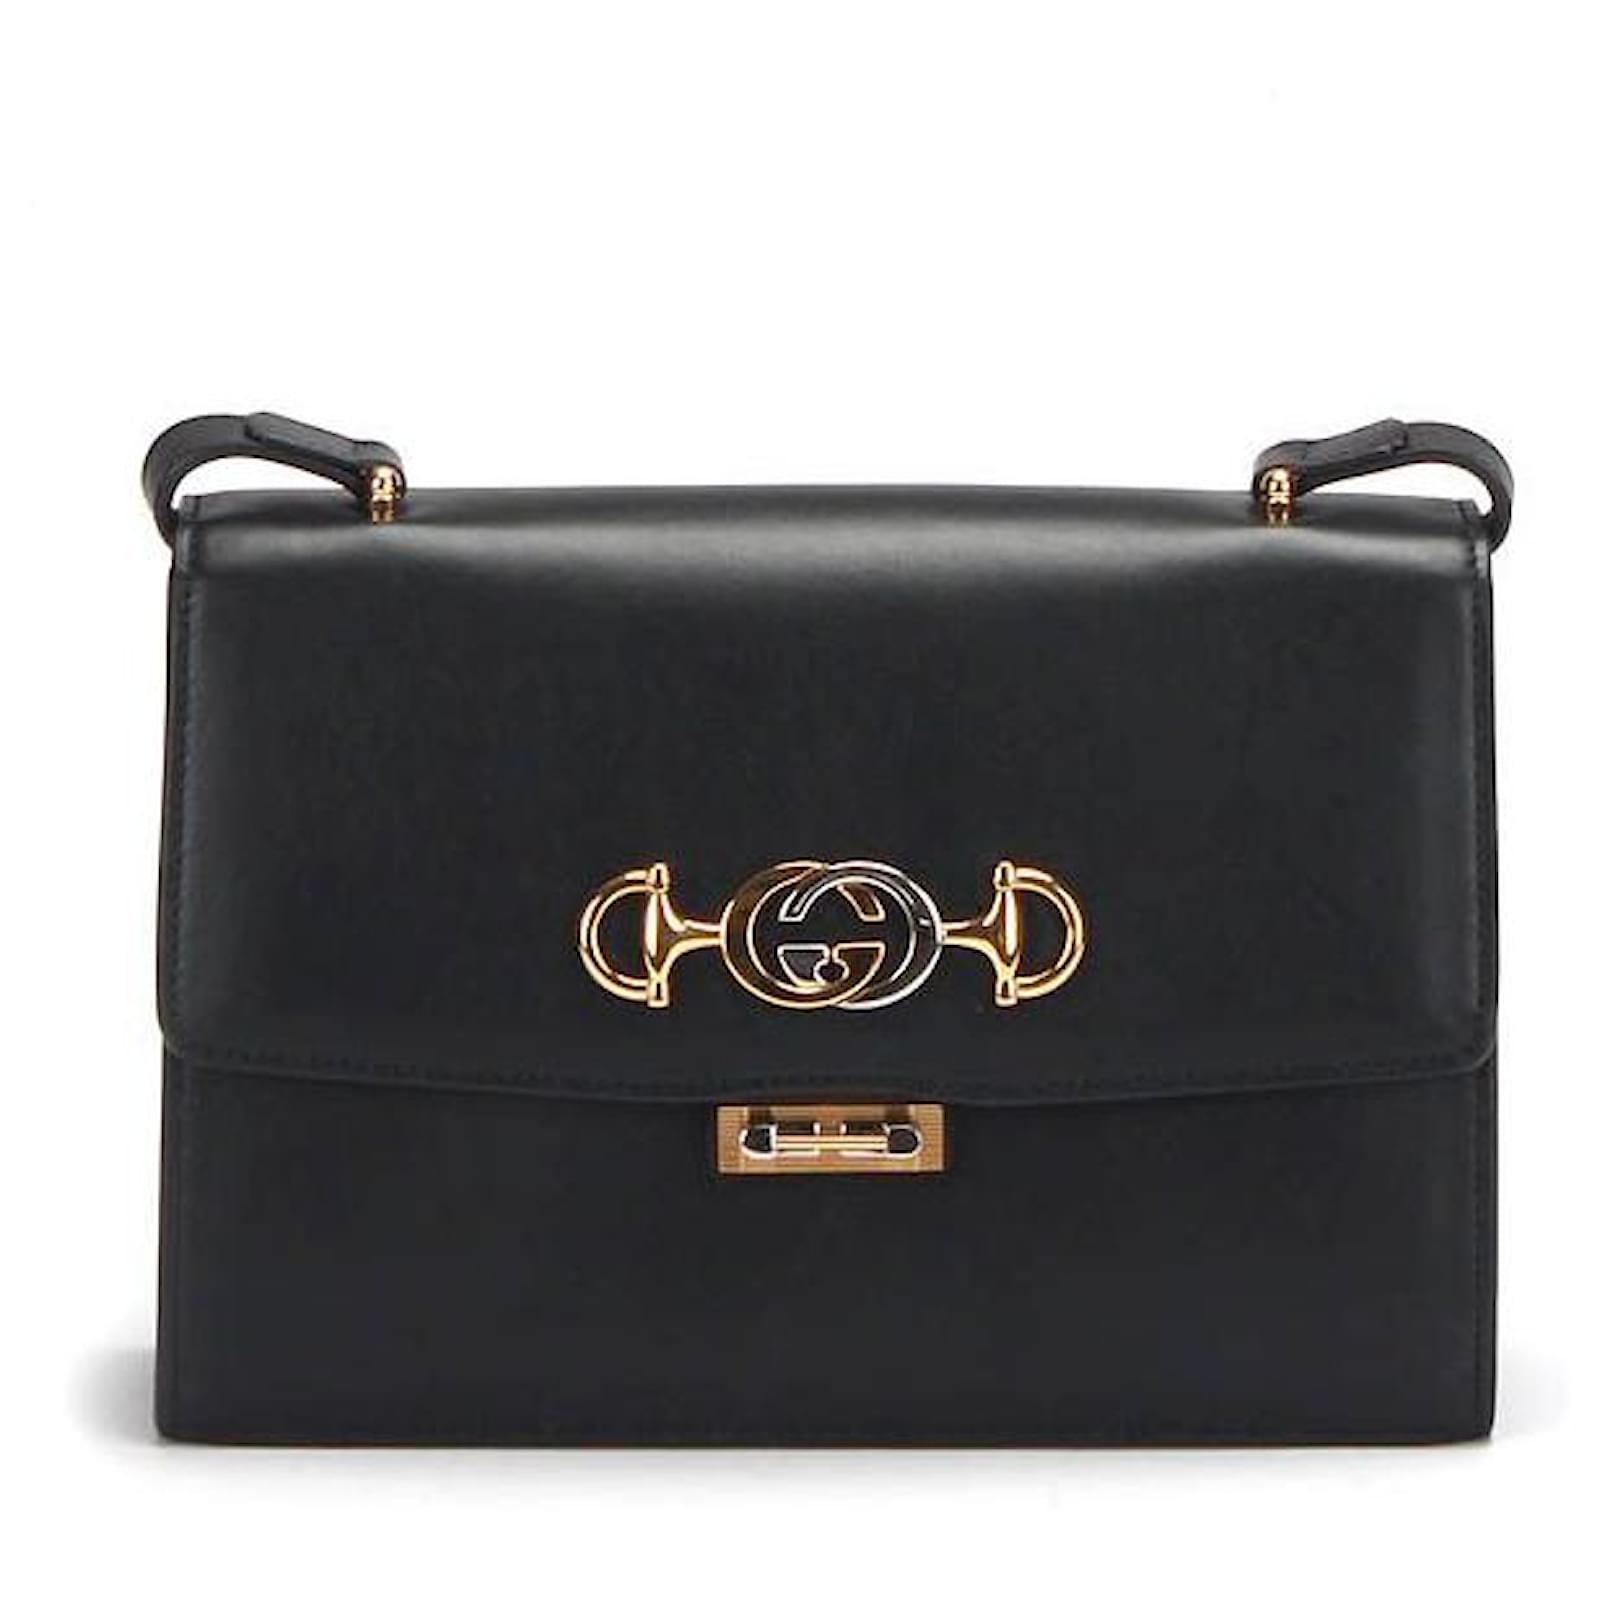 Gucci Small Zumi Leather Crossbody Bag in black calf leather leather ...